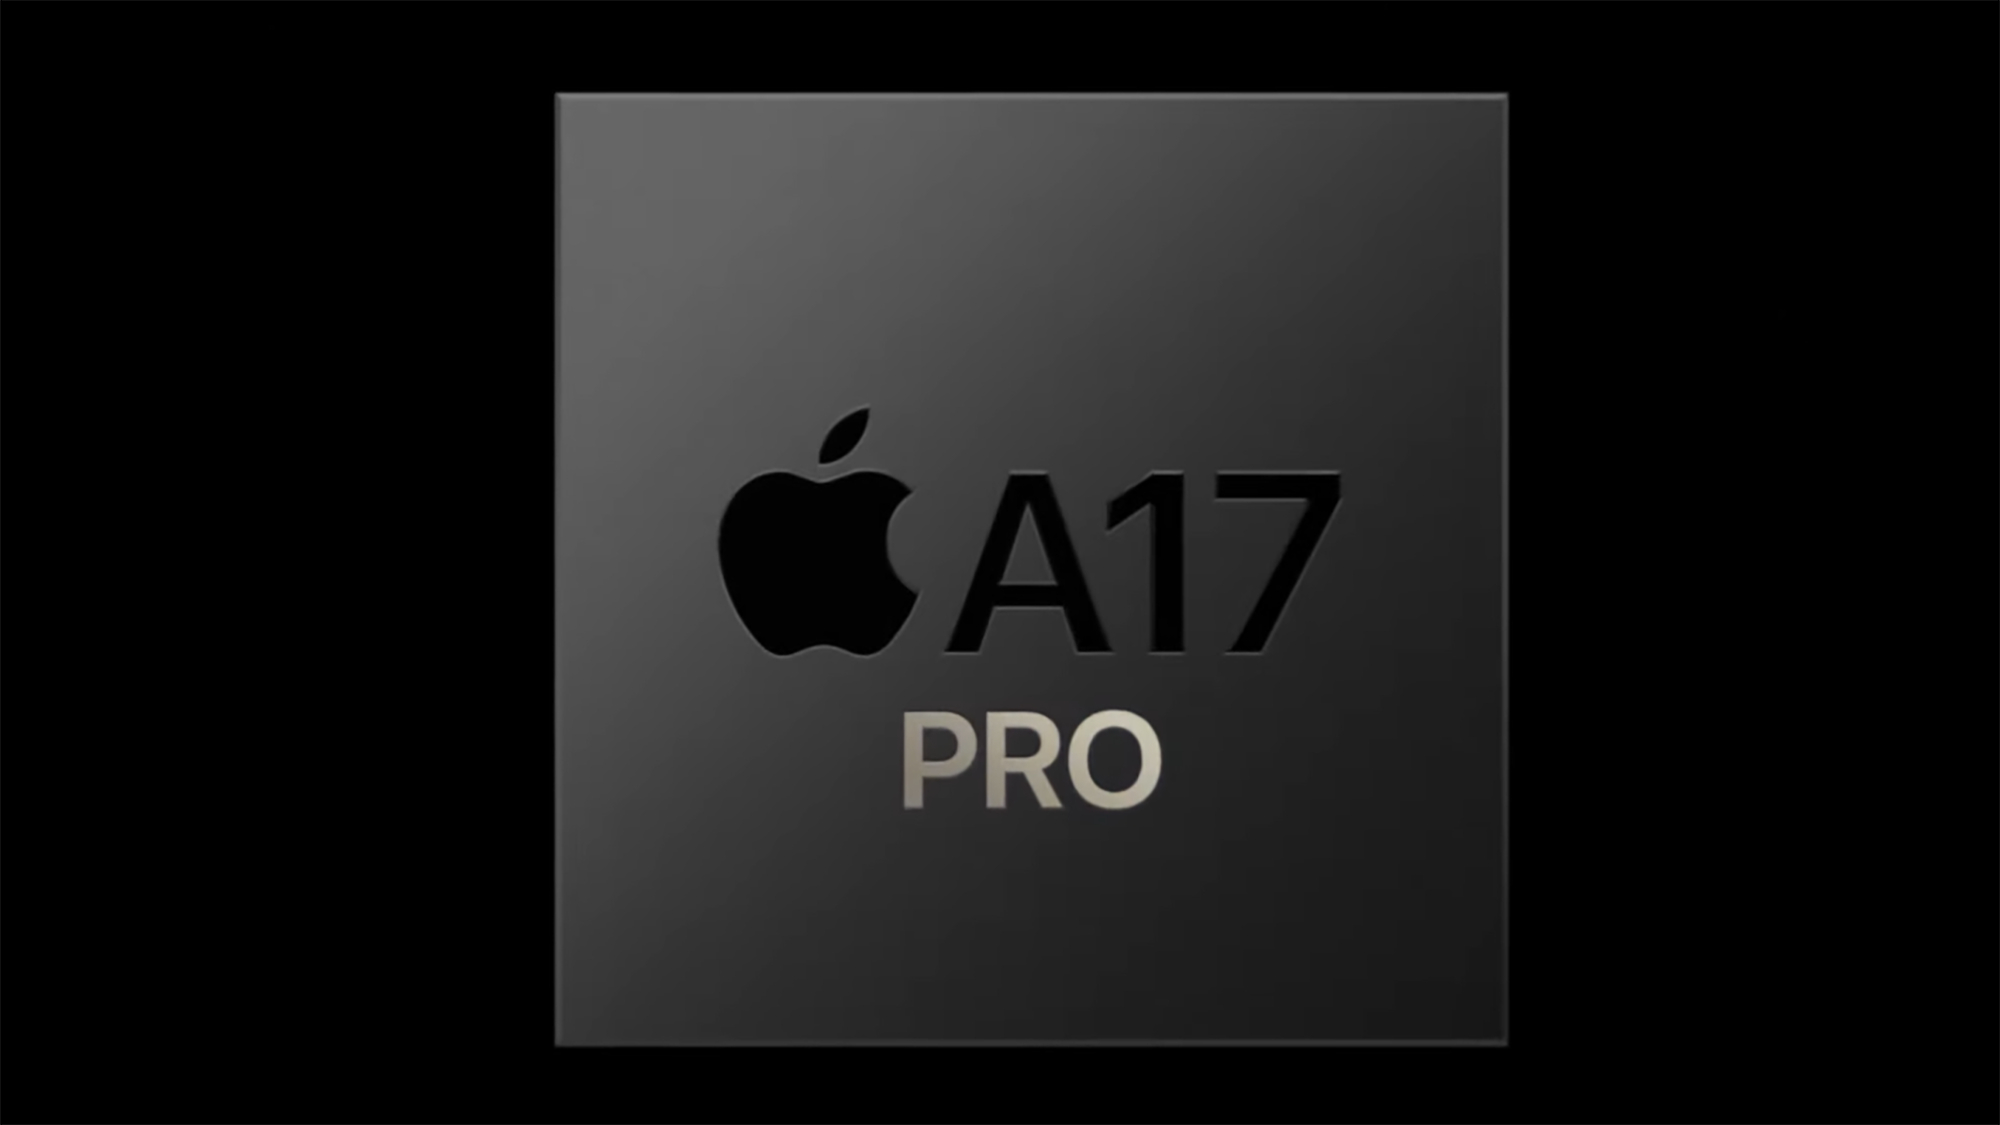 Apple A17 Pro is a match for Intel and AMD CPUs, and this is great news for Apple M3